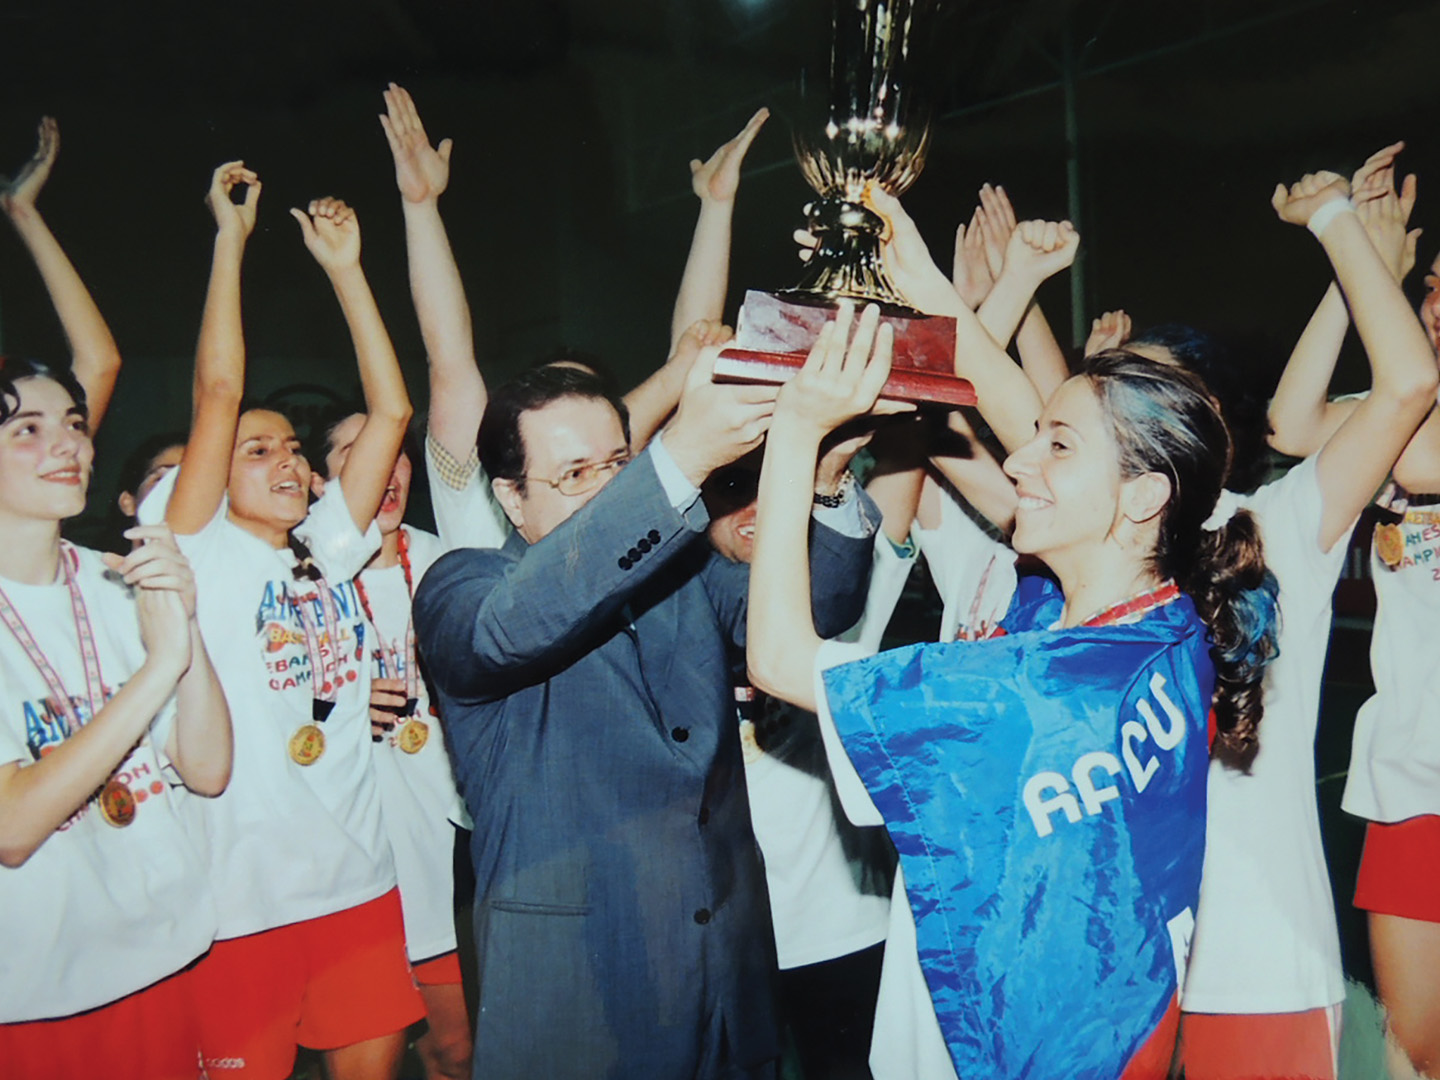 In 2000, jubilant AGBU-AYA champions of the Lebanese National Basketball League are presented with the coveted Cup by the Lebanese Basketball Federation’s president. 